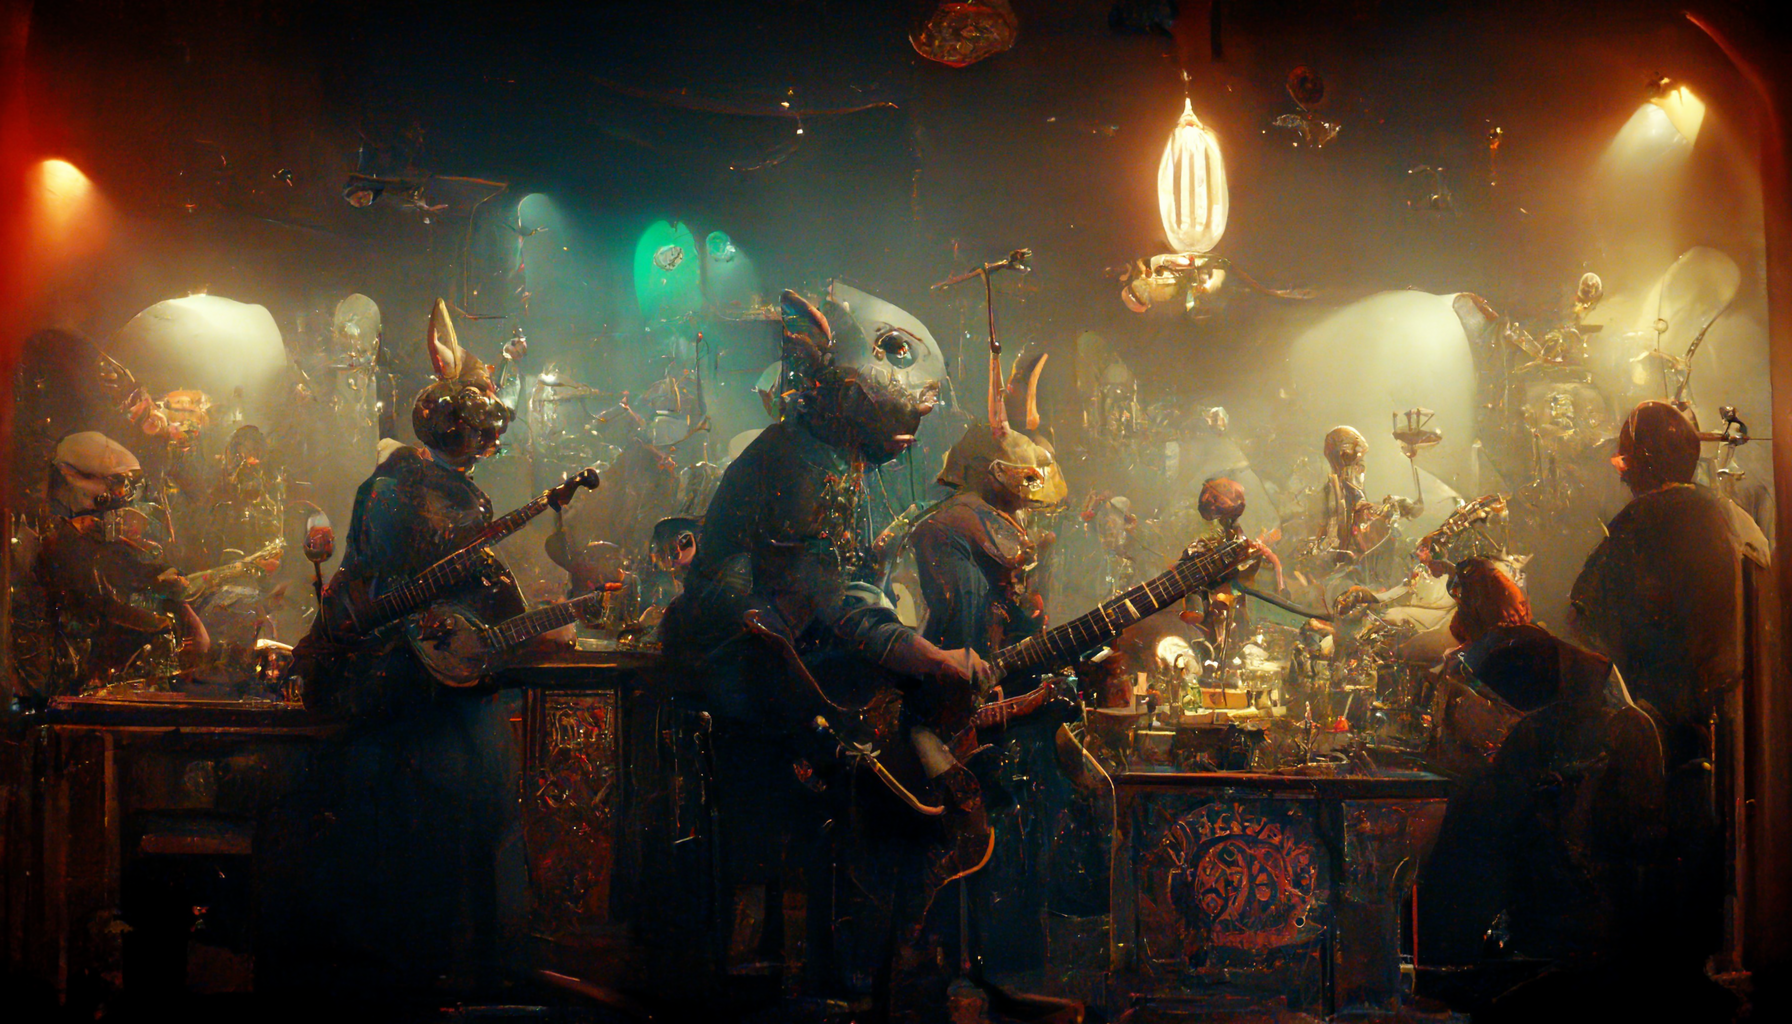 ZenithWombat_A_monster_rock_band_playing_a_gig_in_a_small_bar_i_026deb71-f205-4018-b8a0-8182b974522f.png